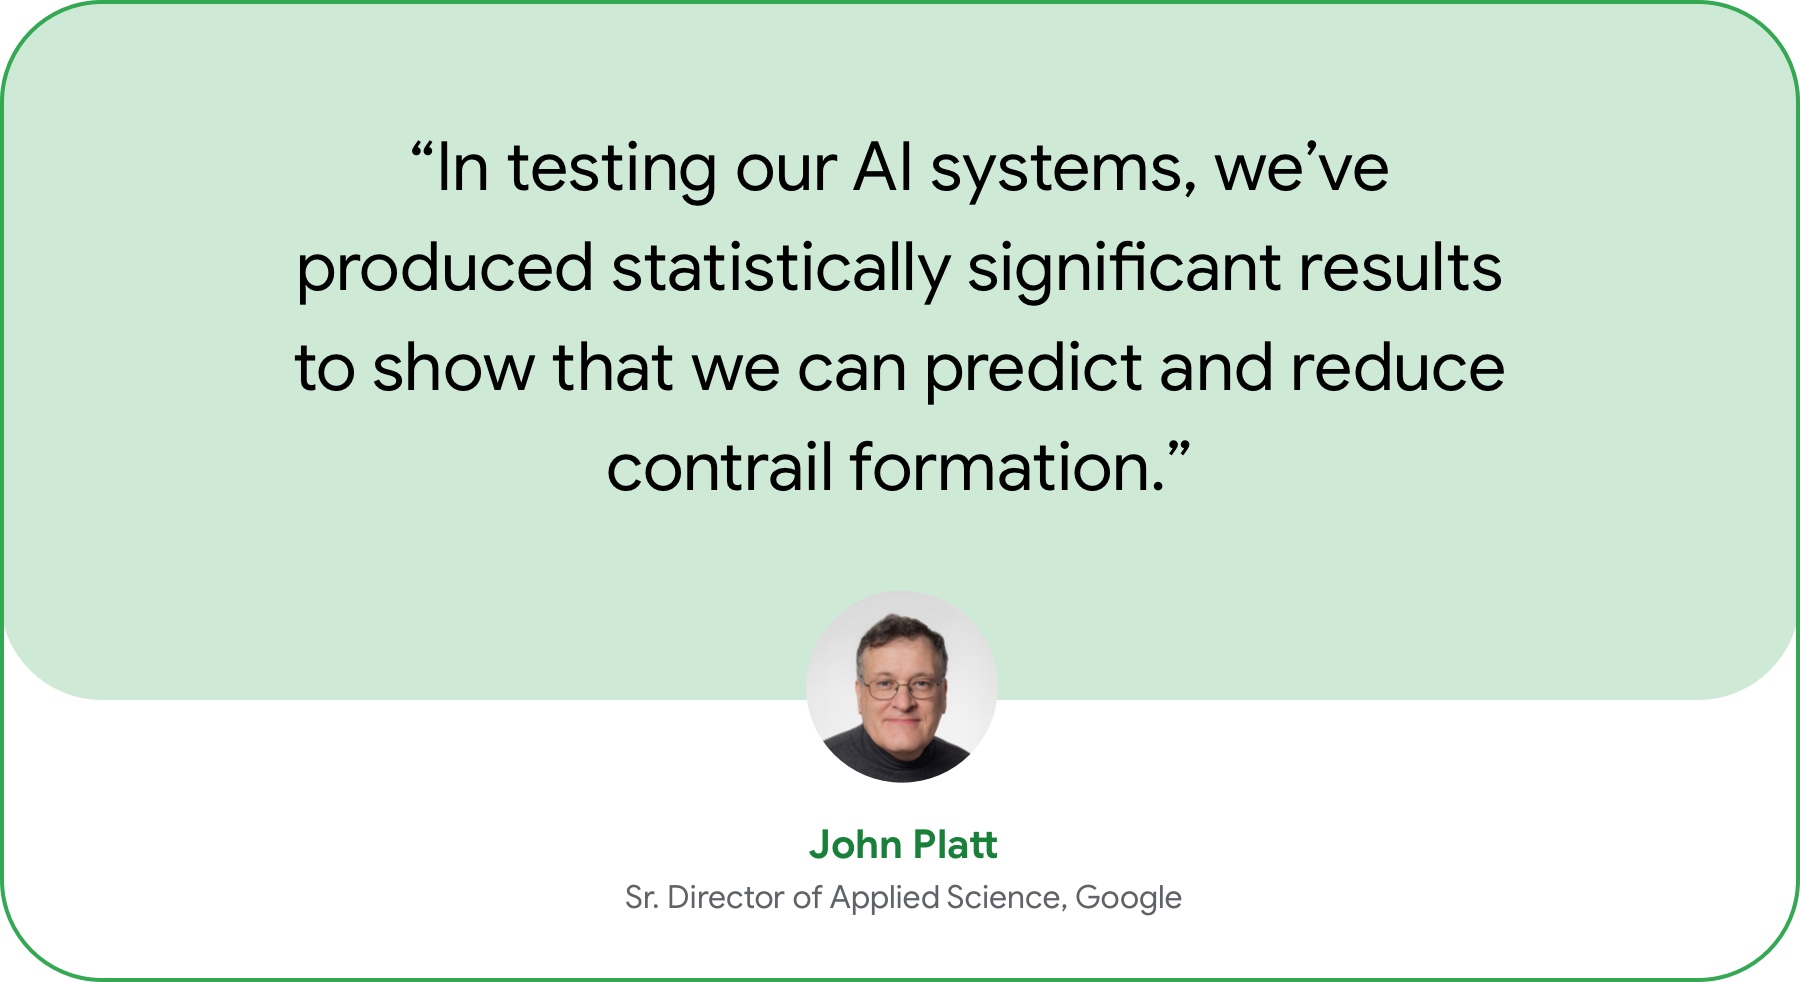 “In working with a major commercial airline to flight-test our AI systems, we’ve produced statistically significant results to show that we can predict and reduce contrail formation.” — John Platt, Sr. Director of Applied Science, Google.  